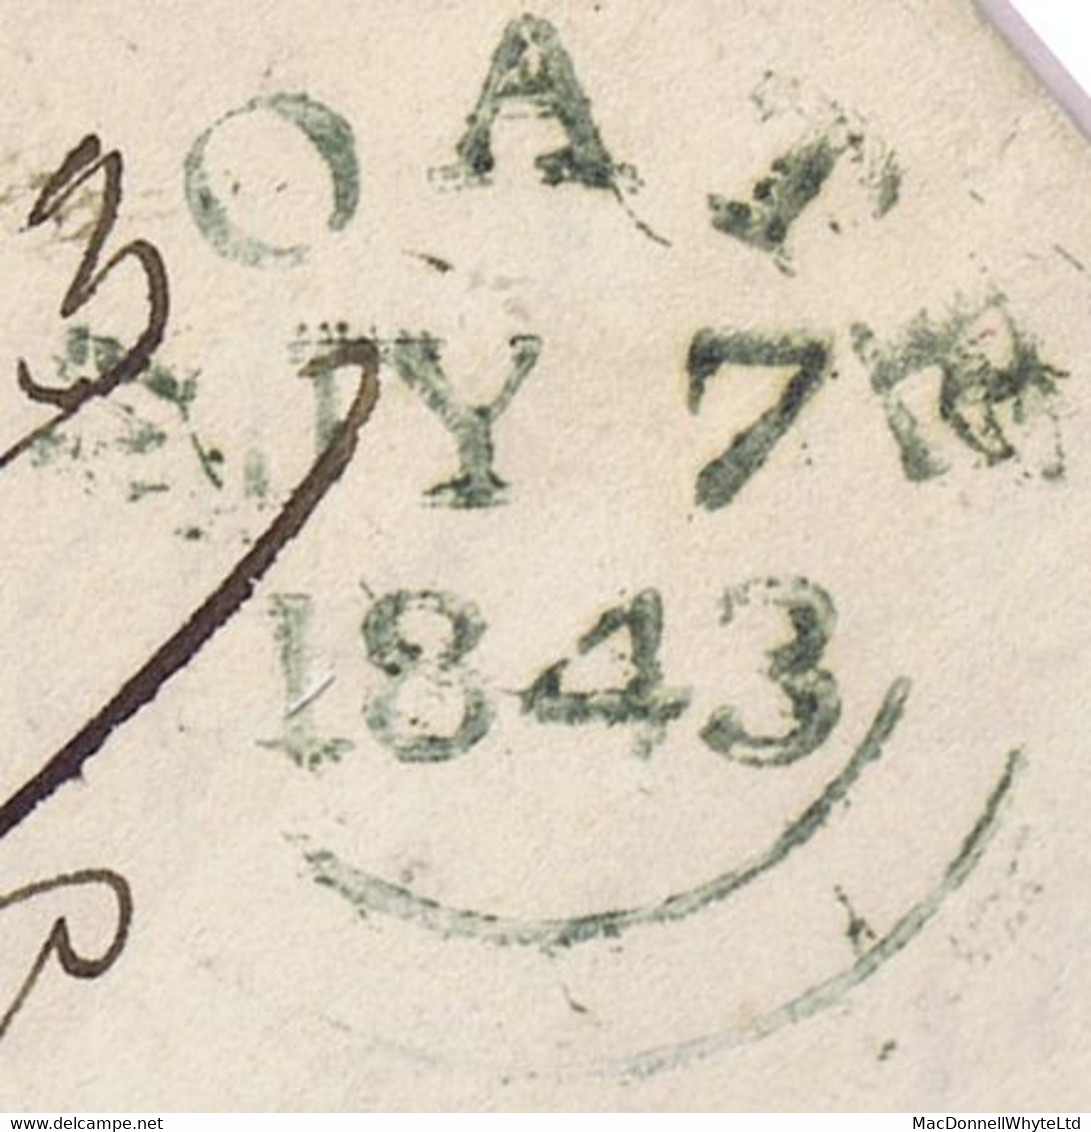 Ireland Westmeath Uniform Penny Post 1844 Cover Streamstown To Dublin Prepaid "1" With MOATE JY 7 1843 Cds In Green - Vorphilatelie